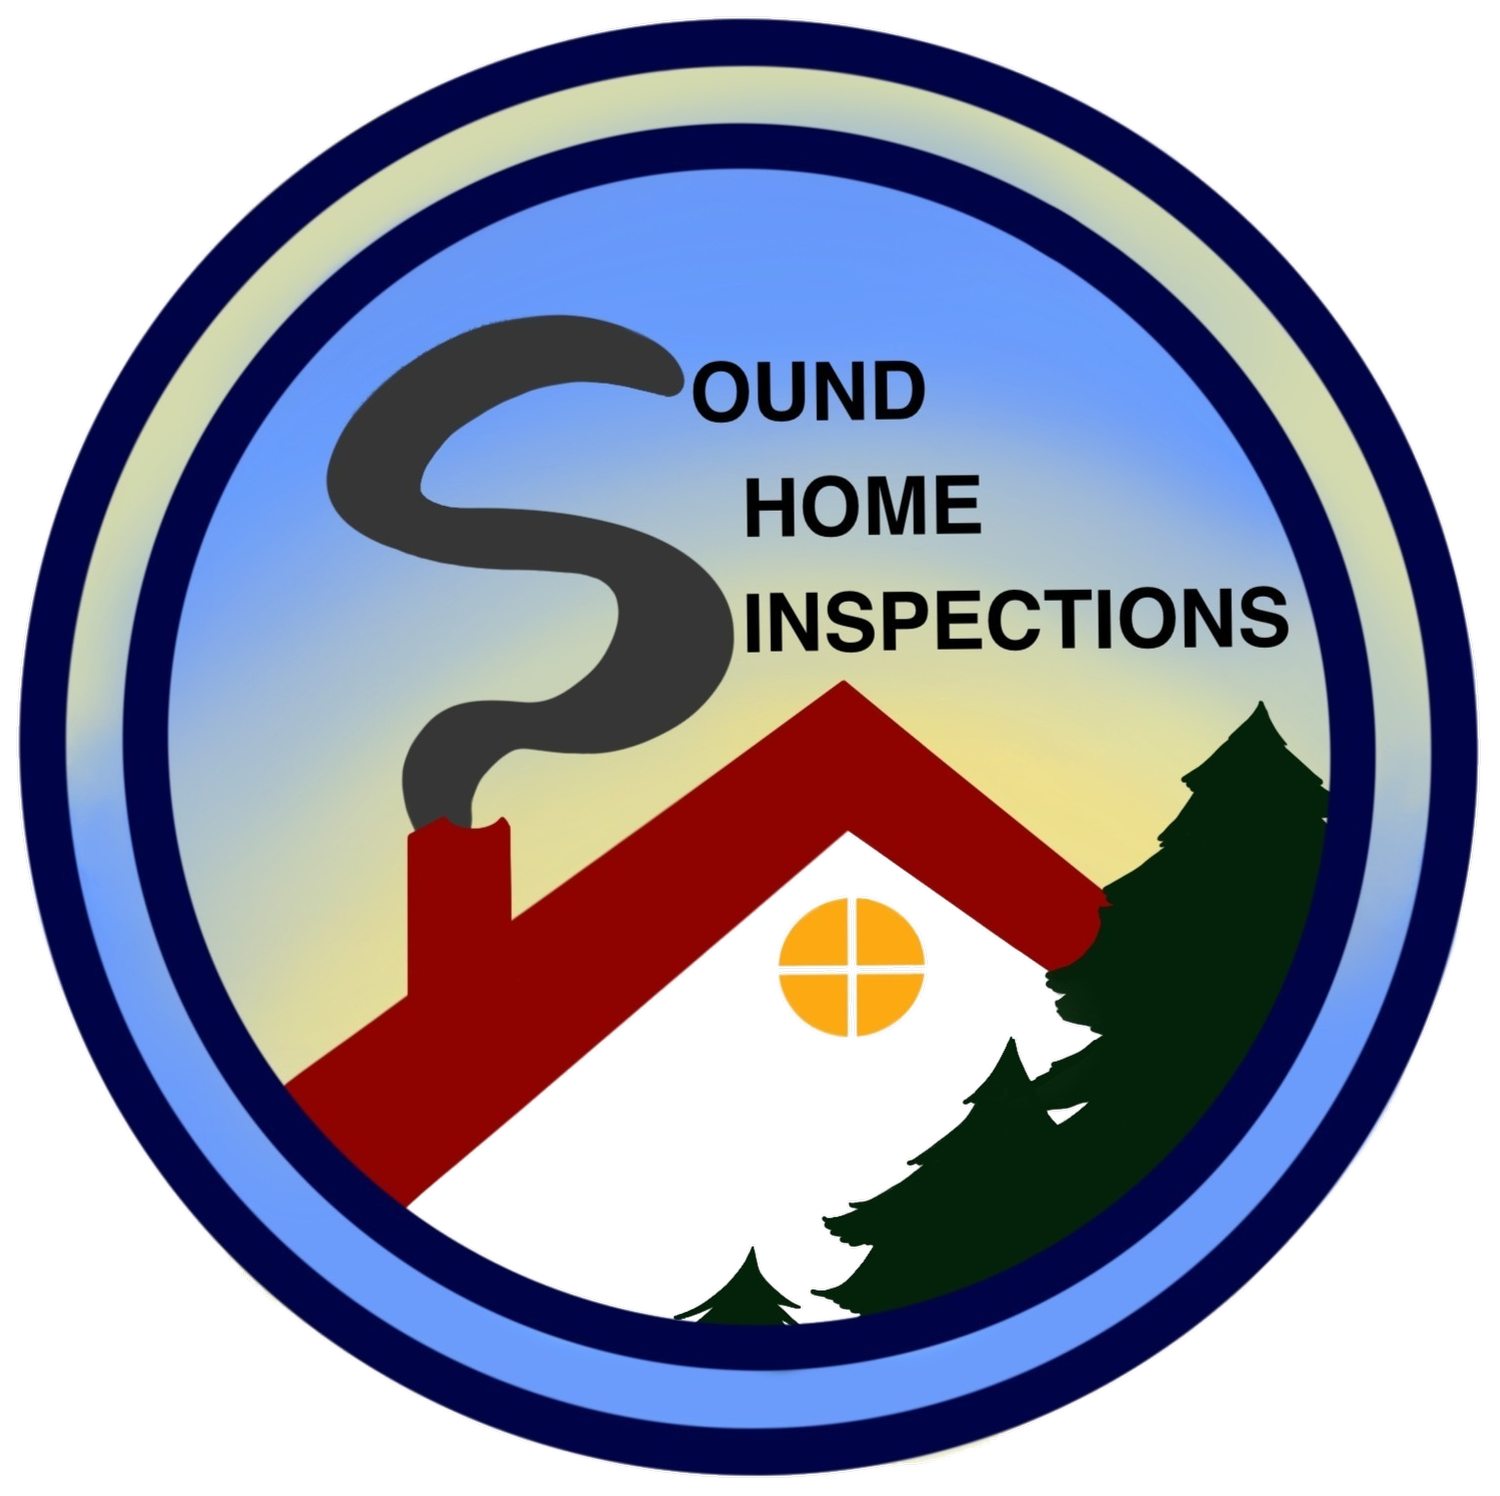  SOUND HOME INSPECTIONS